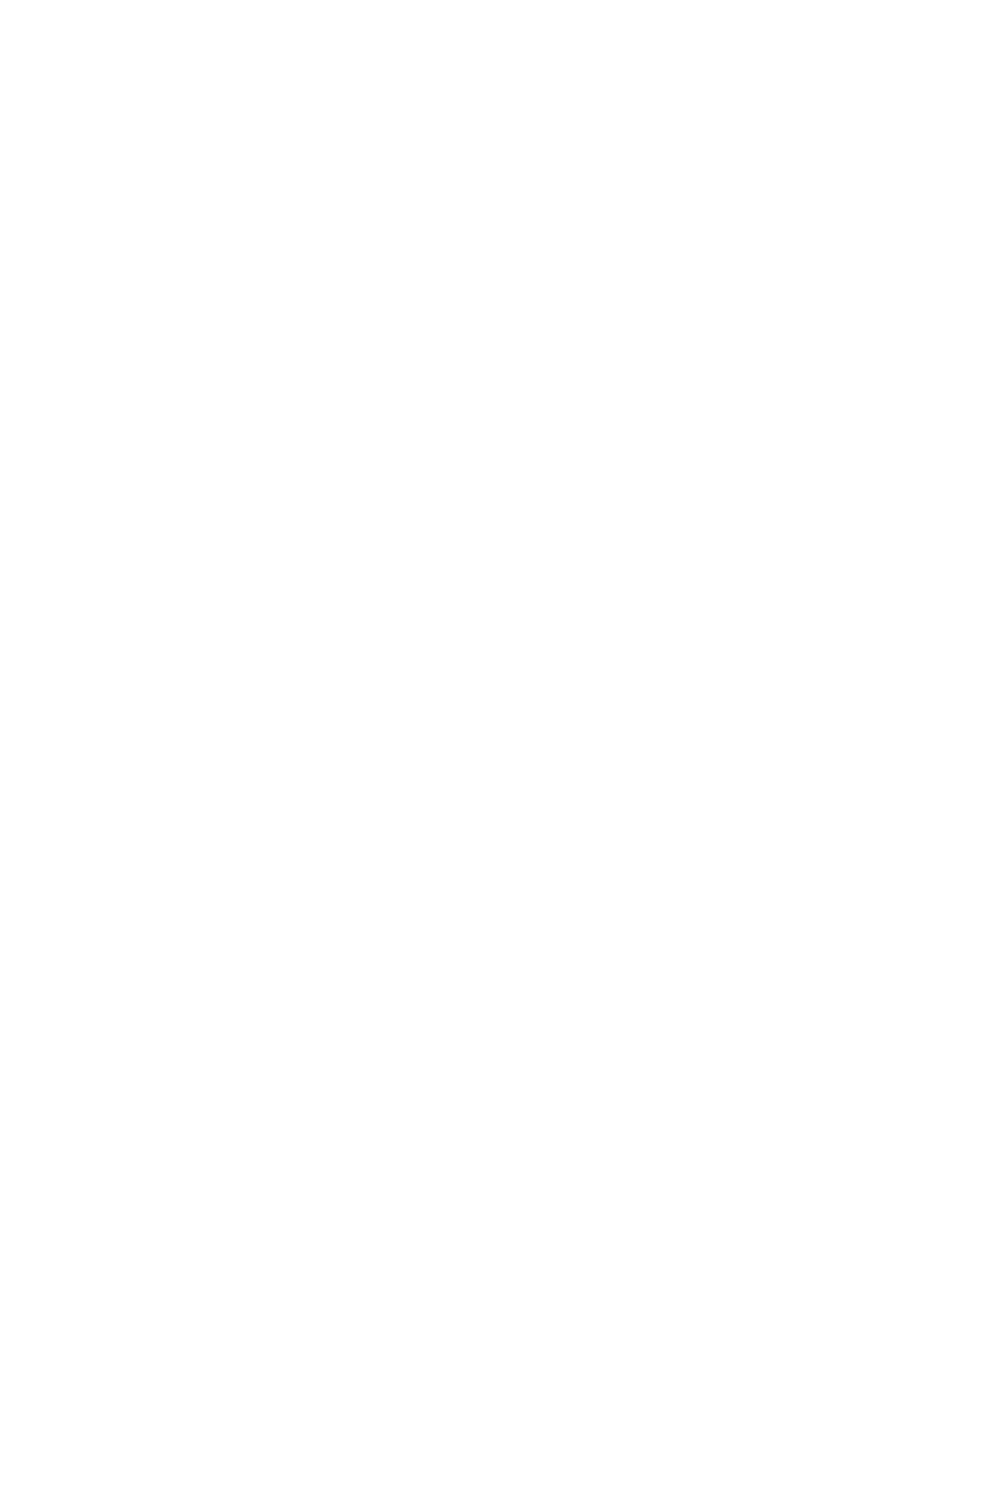 A sketch of OctoTeam values, including: equity, community, and creative learning.